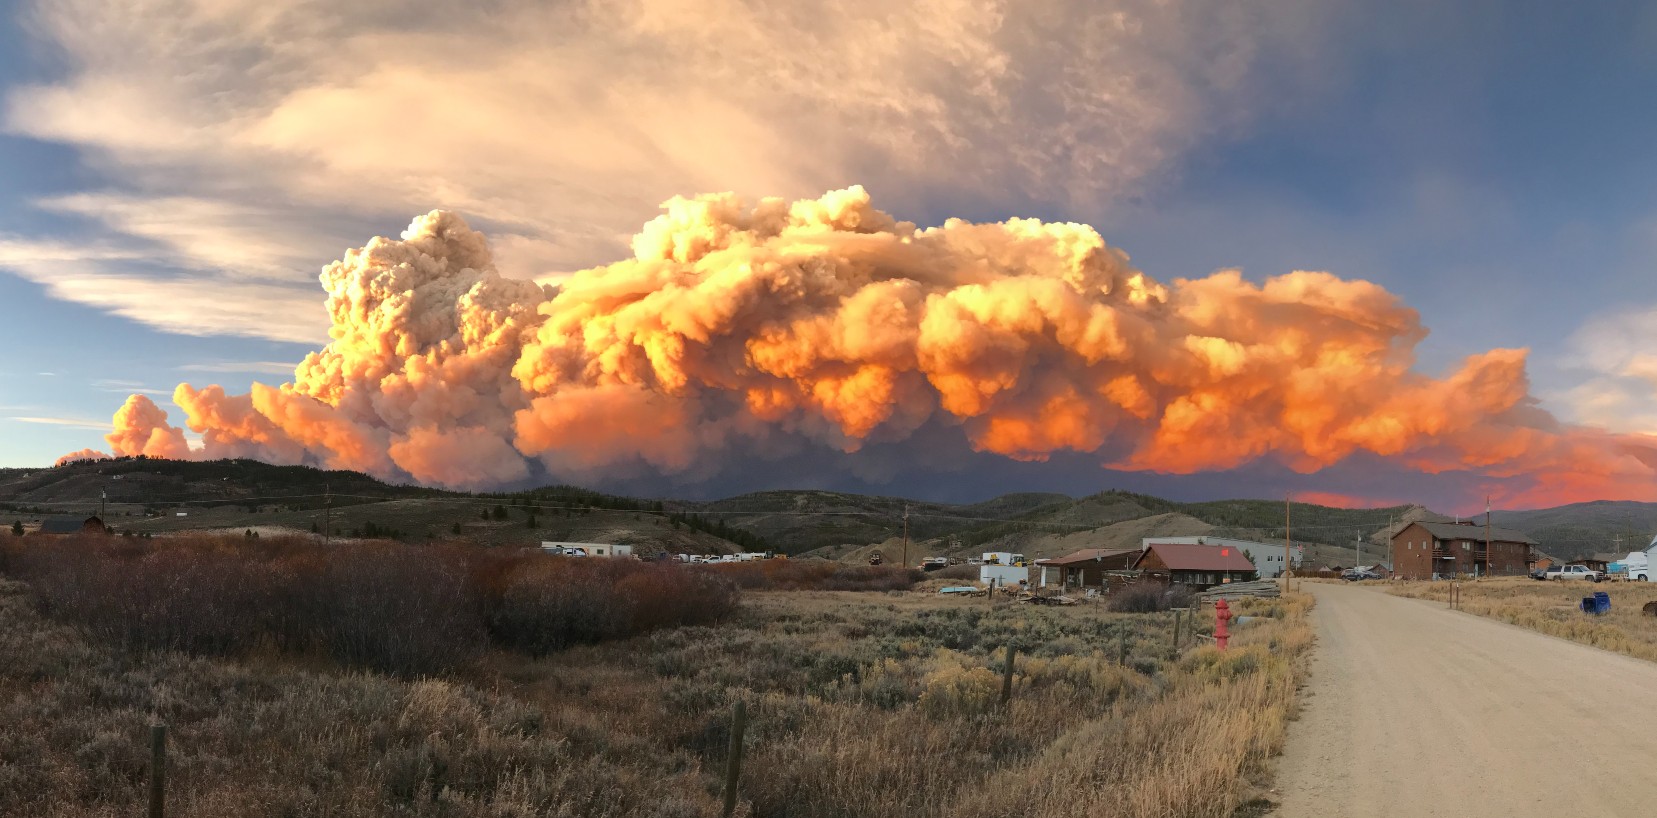 The East Troublesome Fire in 2020 burned 193,812 acres, making it the second largest in Colorado history. Photo by <b>Jessi Burns ’06</b>.